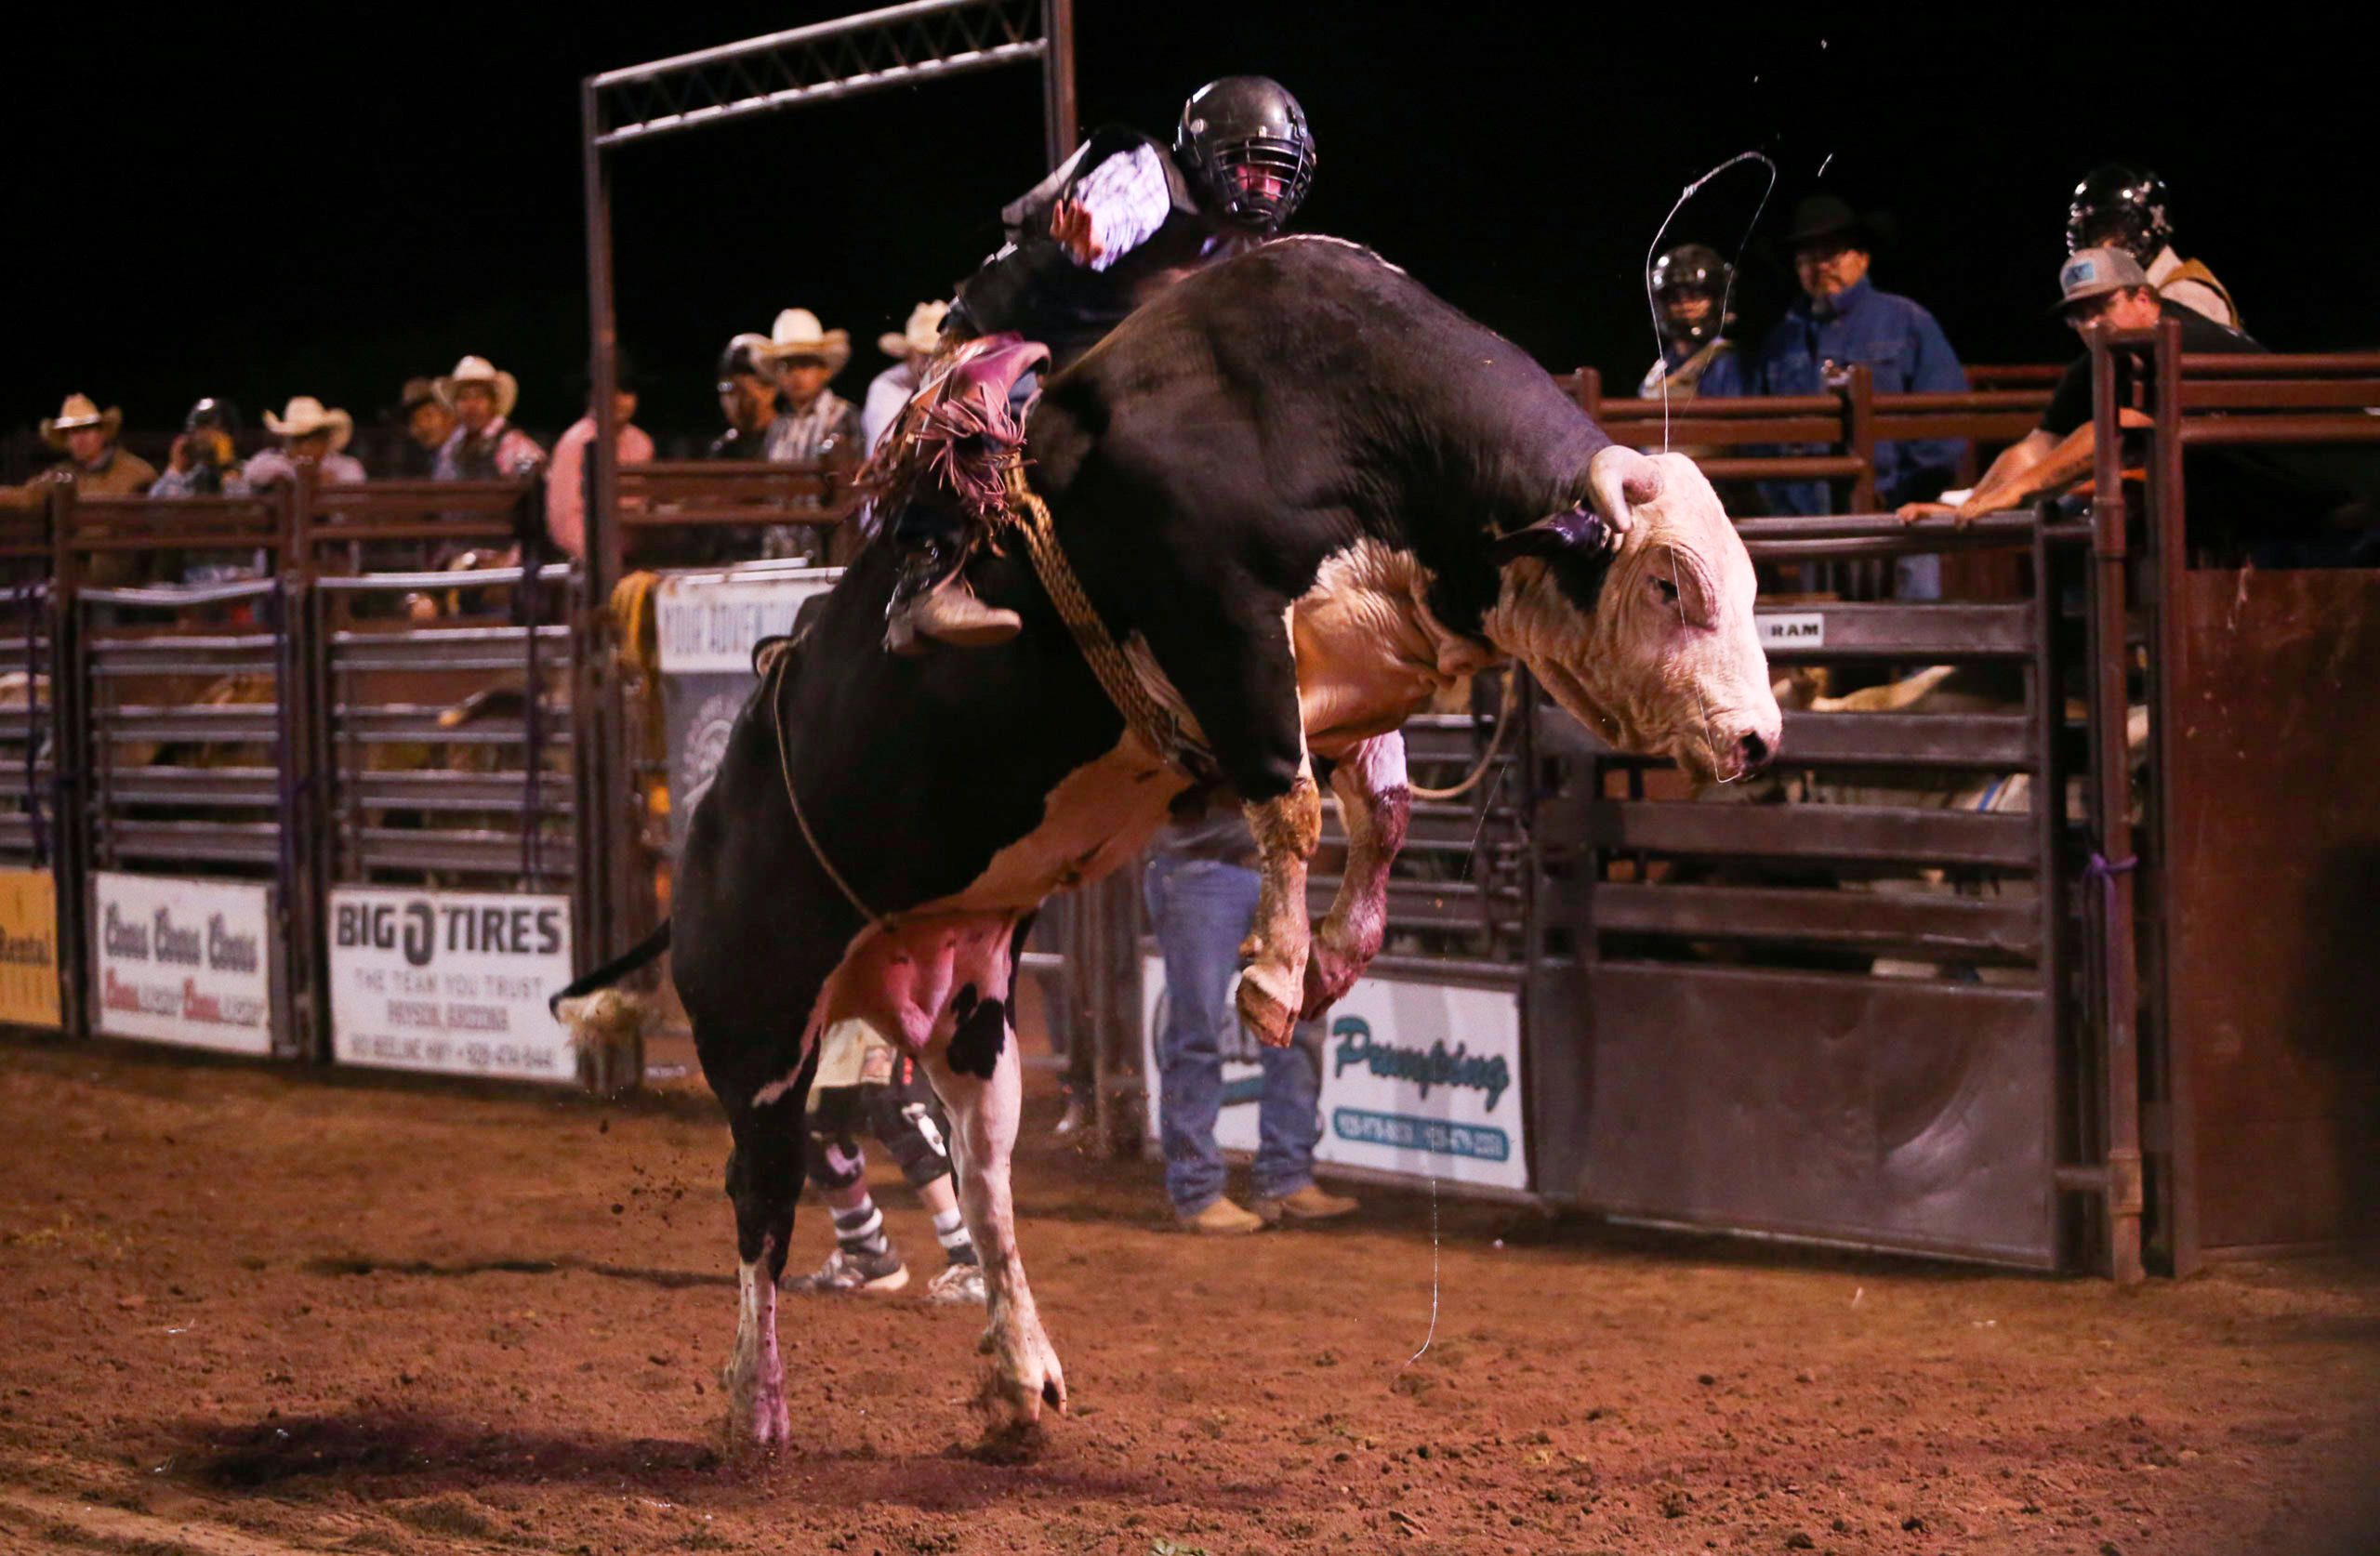 Clay Wagner holds onto Salt River Rodeo’s Saturday Night Fever during the bull riding event at the 36th Gary Hardt Memorial Rodeo. (Photo by Joey Plishka/Cronkite News)
